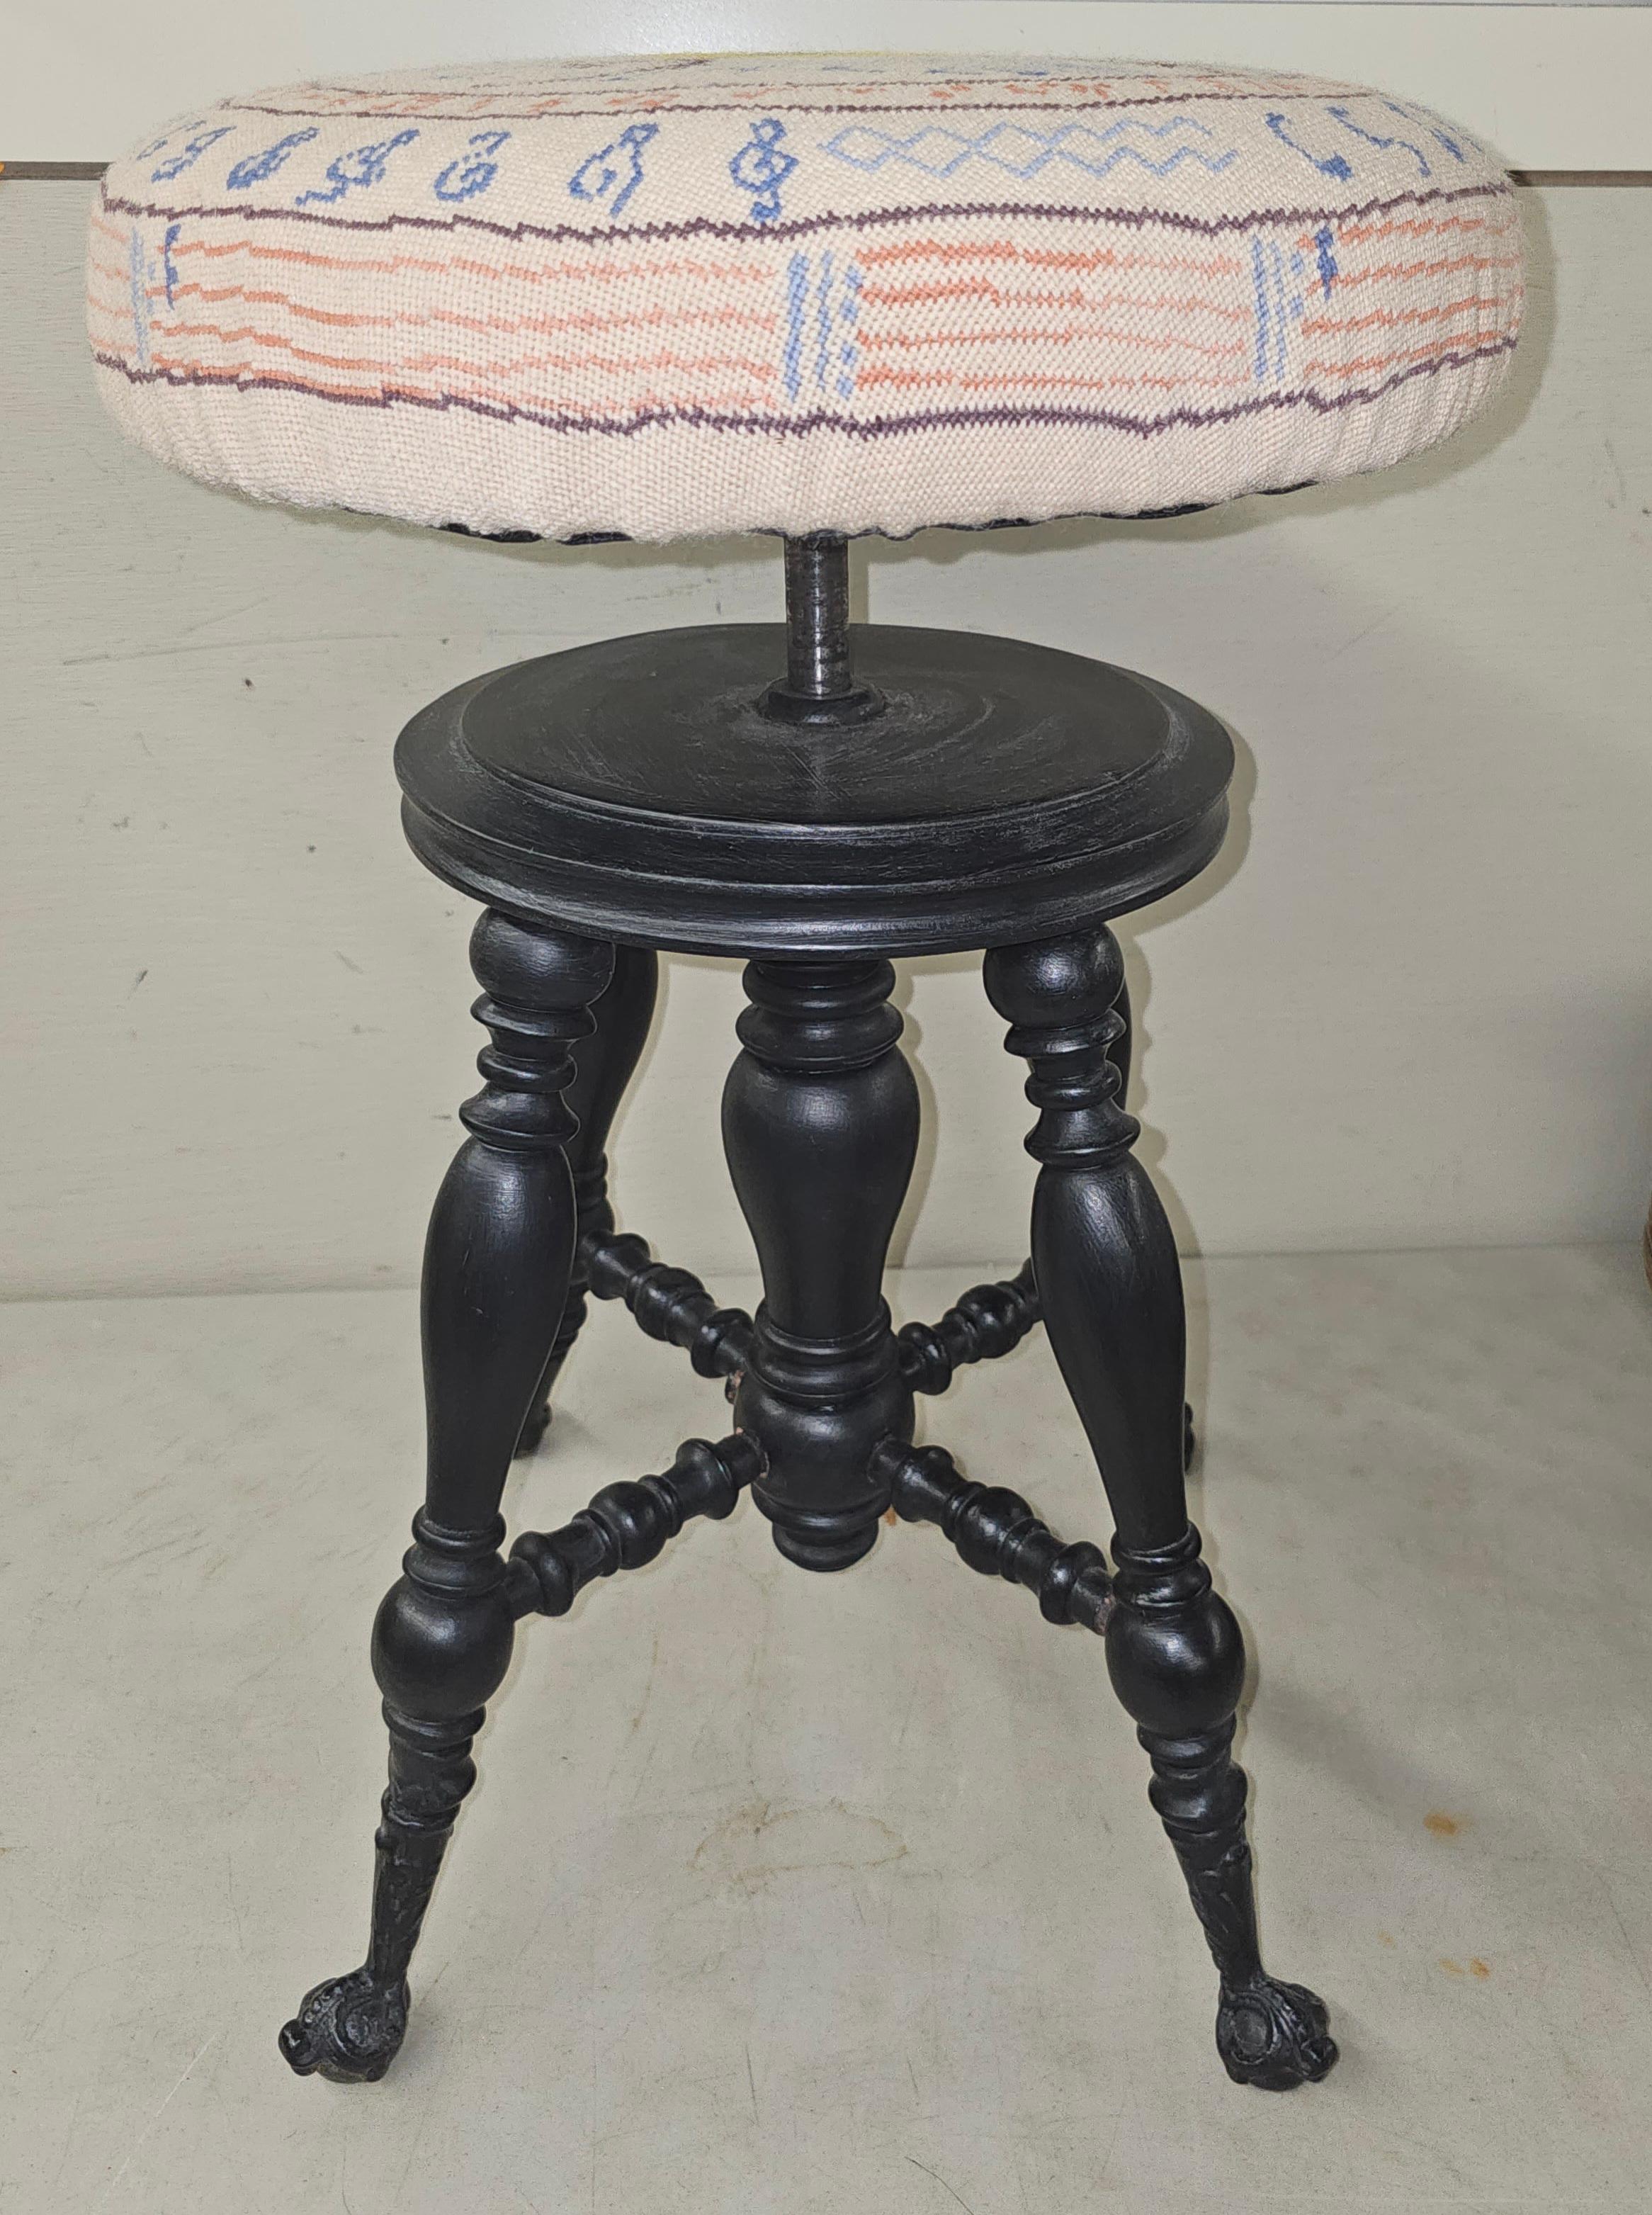 Upholstery 19th Century Victorian Ebonized Wood and Needlepoint Piano Stool For Sale